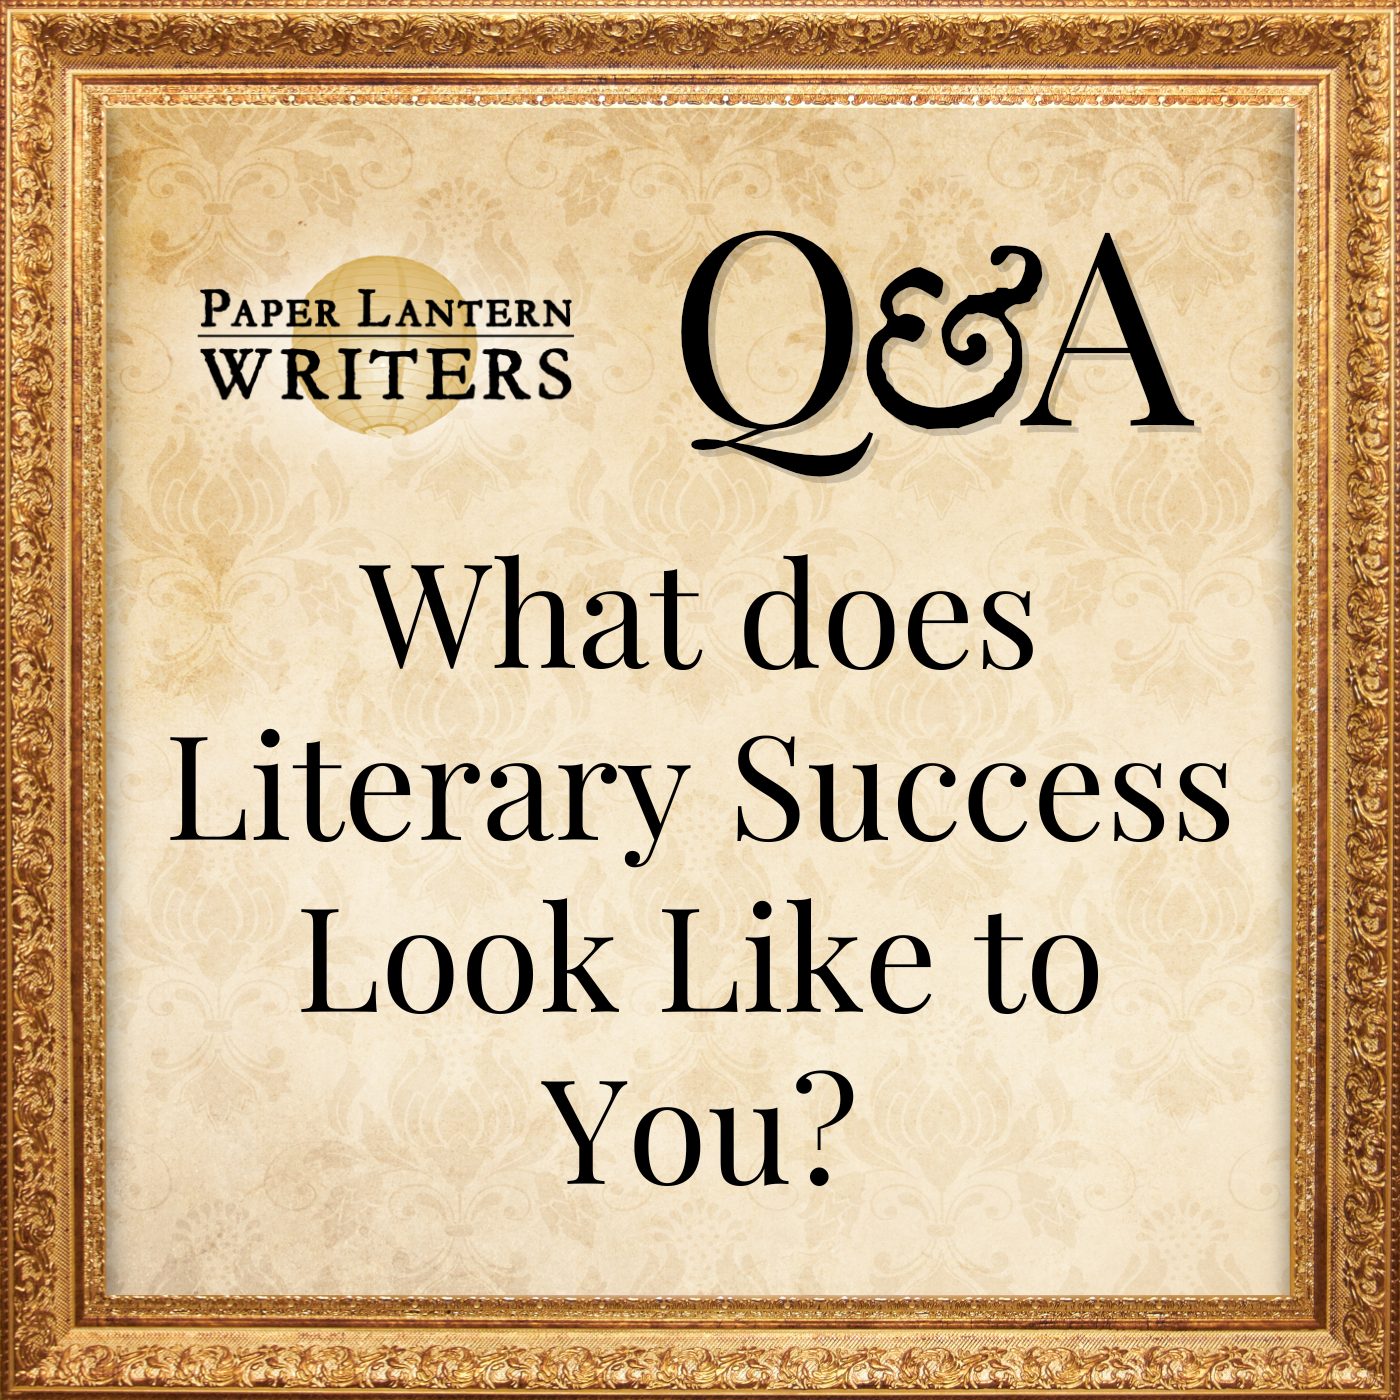 Q & A What does Literary Success Look Like to You?